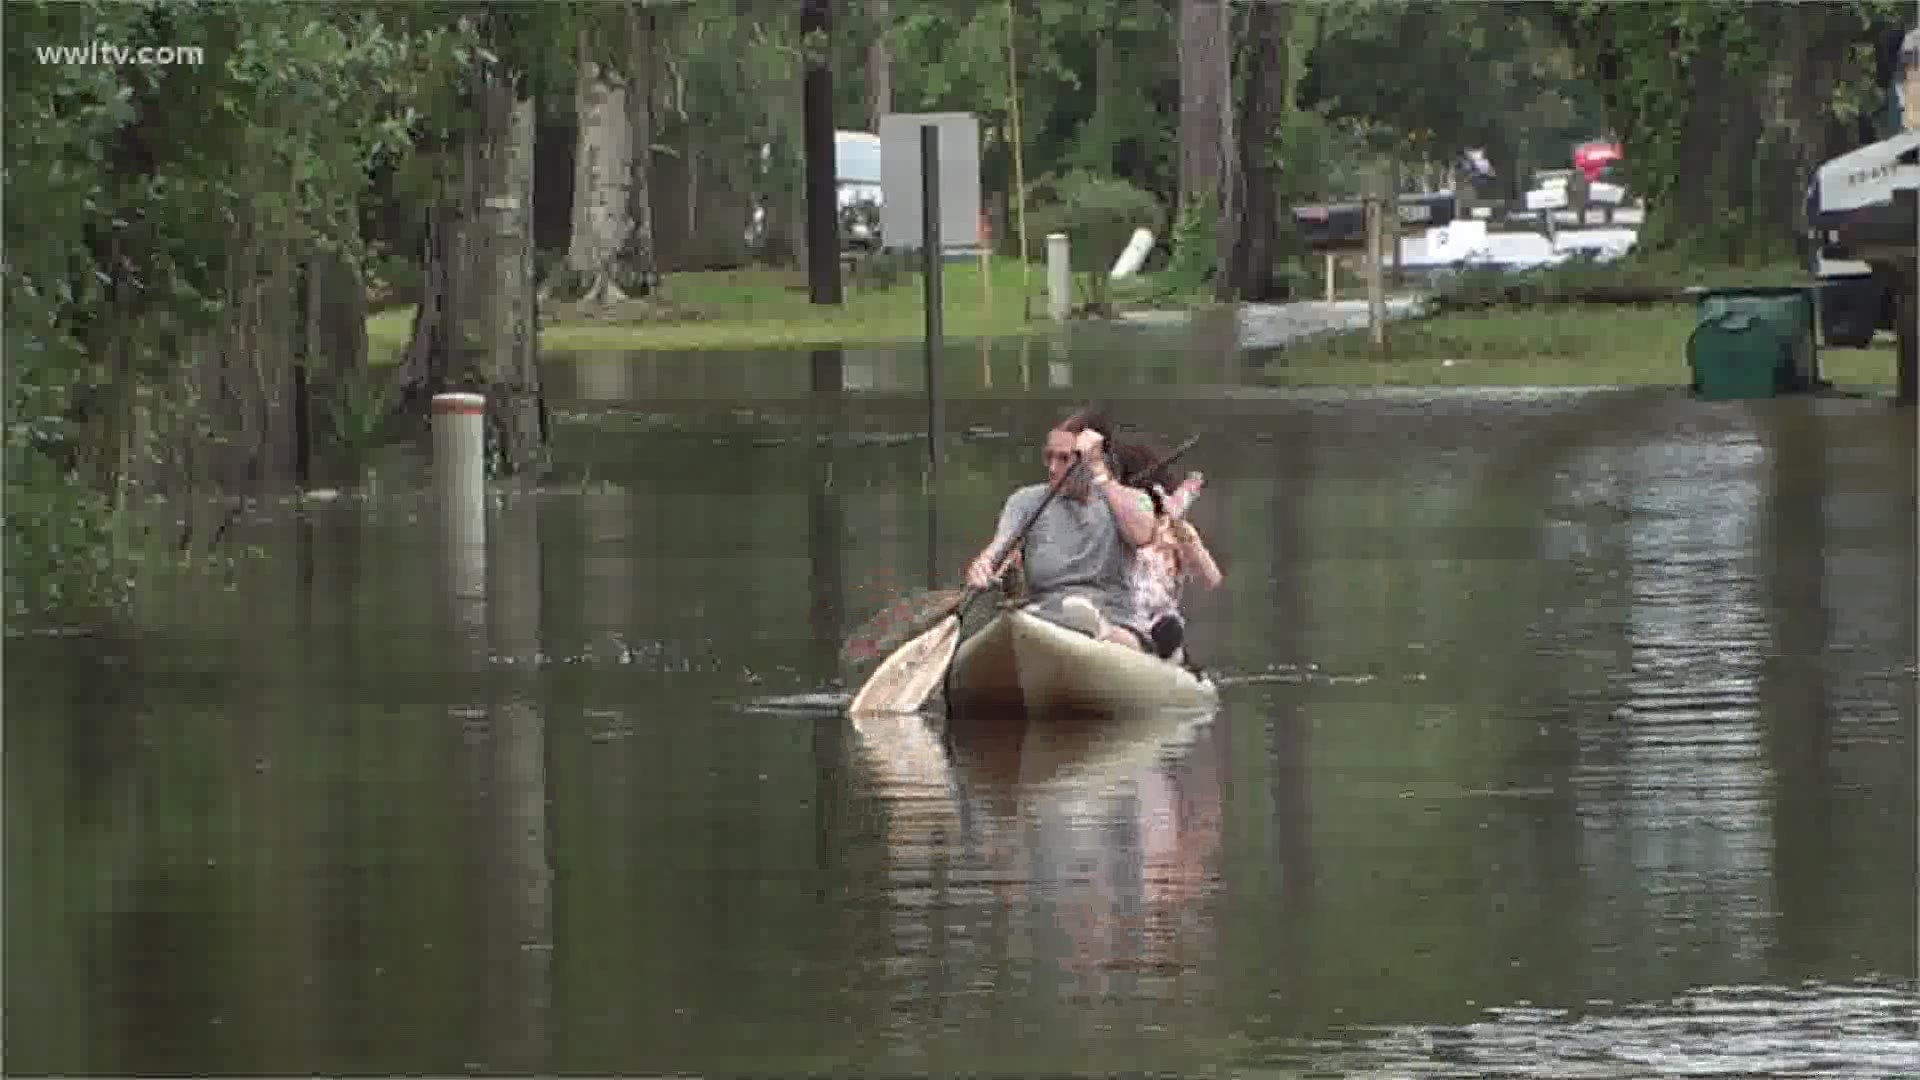 Residents of the Slidell neighborhood were surprised by how high water rose during Tropical Storm Cristobal.